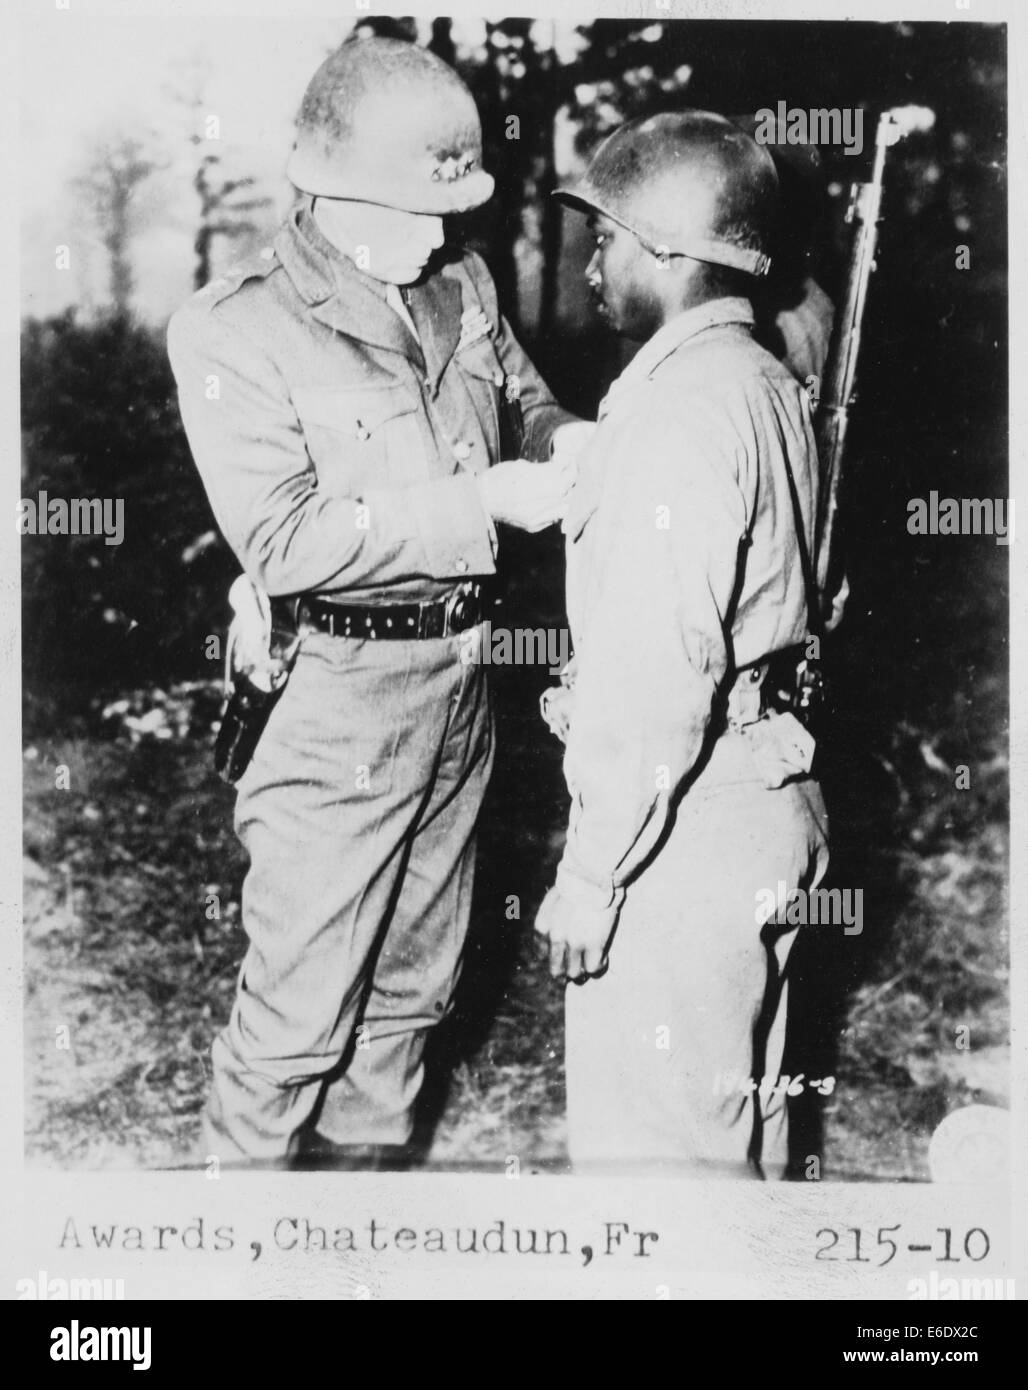 Lt. General George S. Patton Pins Silver Star on Private Ernest A. Jenkin after Liberation of Chateaudun, France, Oct. 13, 1944 Stock Photo